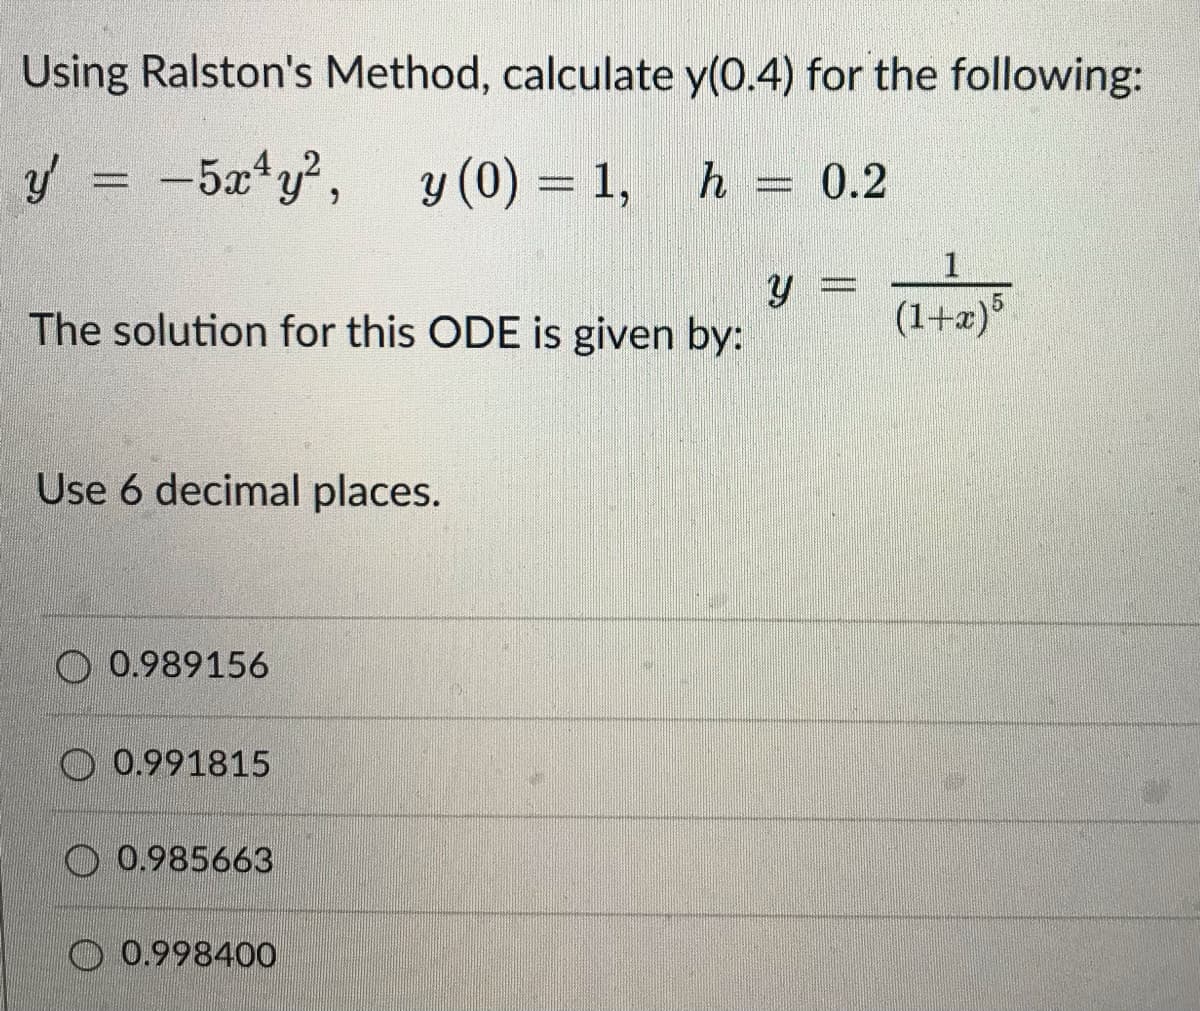 Using Ralston's Method, calculate y(0.4) for the following:
y = -5x¹y², y (0) = 1, h = 0.2
y =
The solution for this ODE is given by:
(1+x) 5
Use 6 decimal places.
O 0.989156
0.991815
0.985663
0.998400